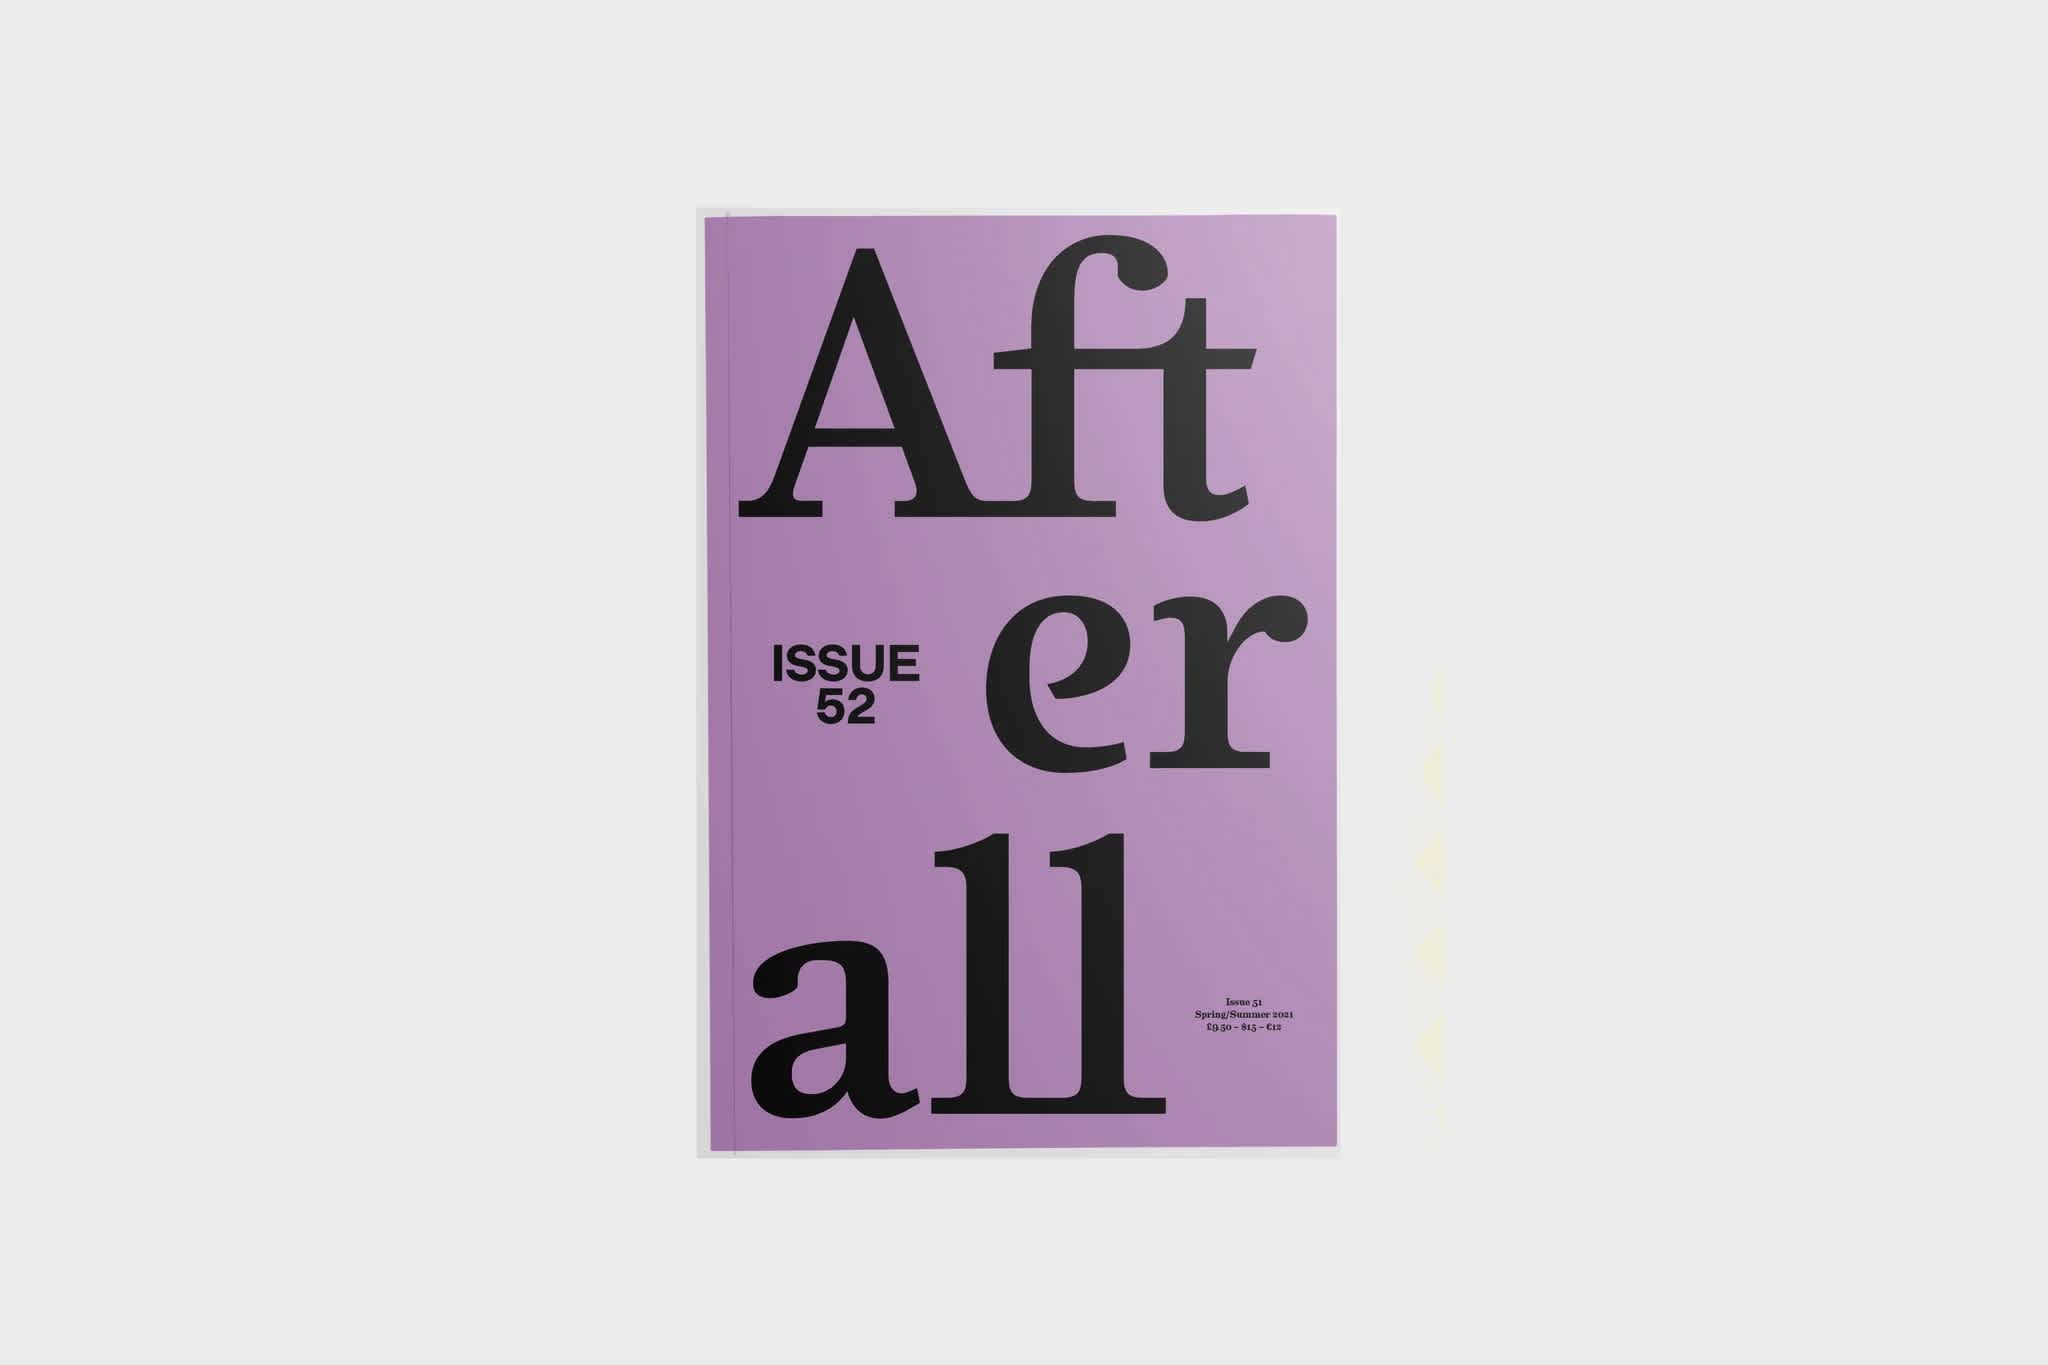 Light purple magazine cover with title, "Afterall" in black letters. The text "Issue 52" is printed in black on the left side. 